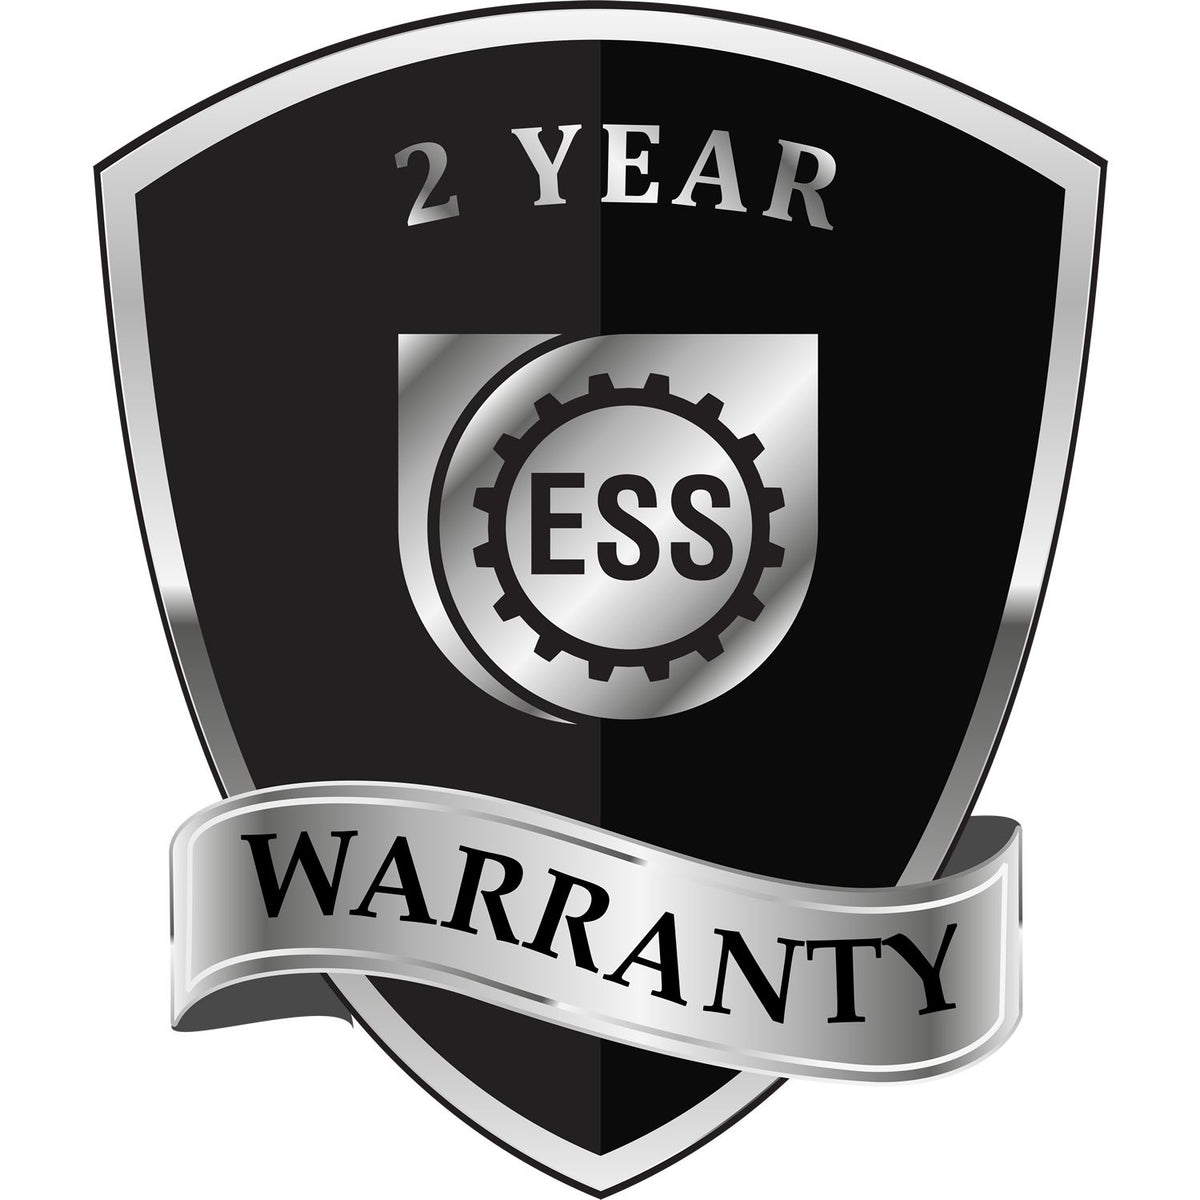 A black and silver badge or emblem showing warranty information for the Gift New Jersey Engineer Seal